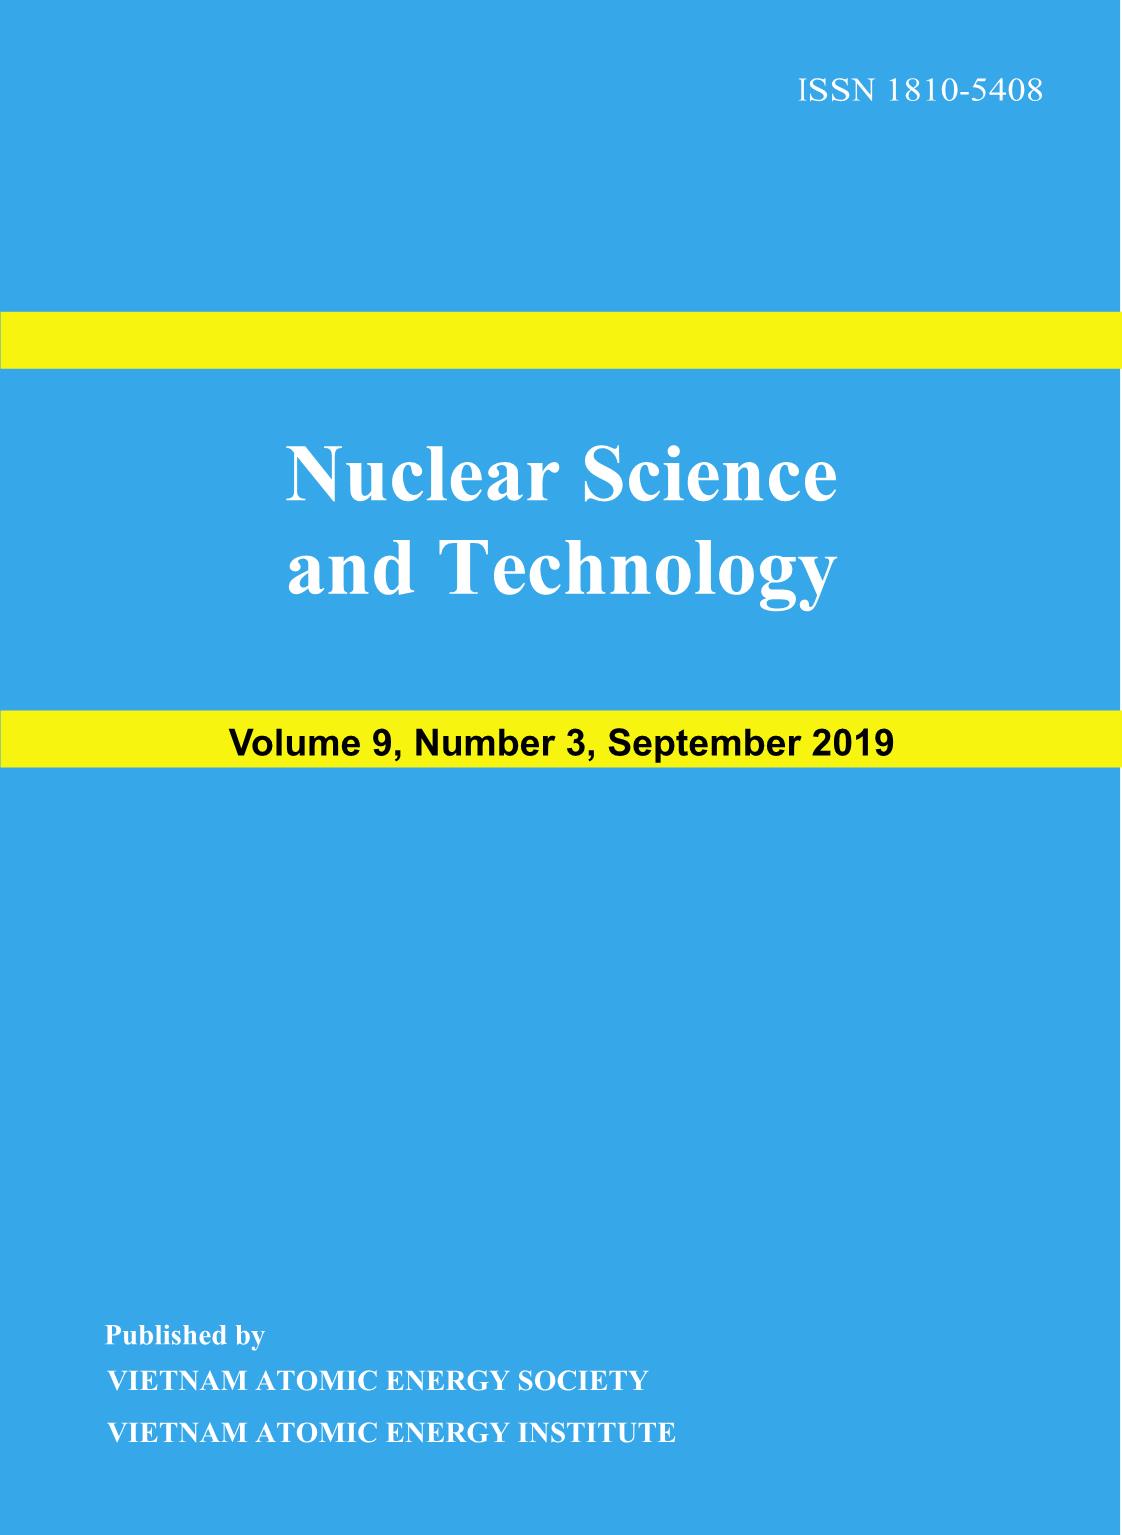 Nuclear Science and Technology - Volume 9, Number 3, September 2019 trang 1